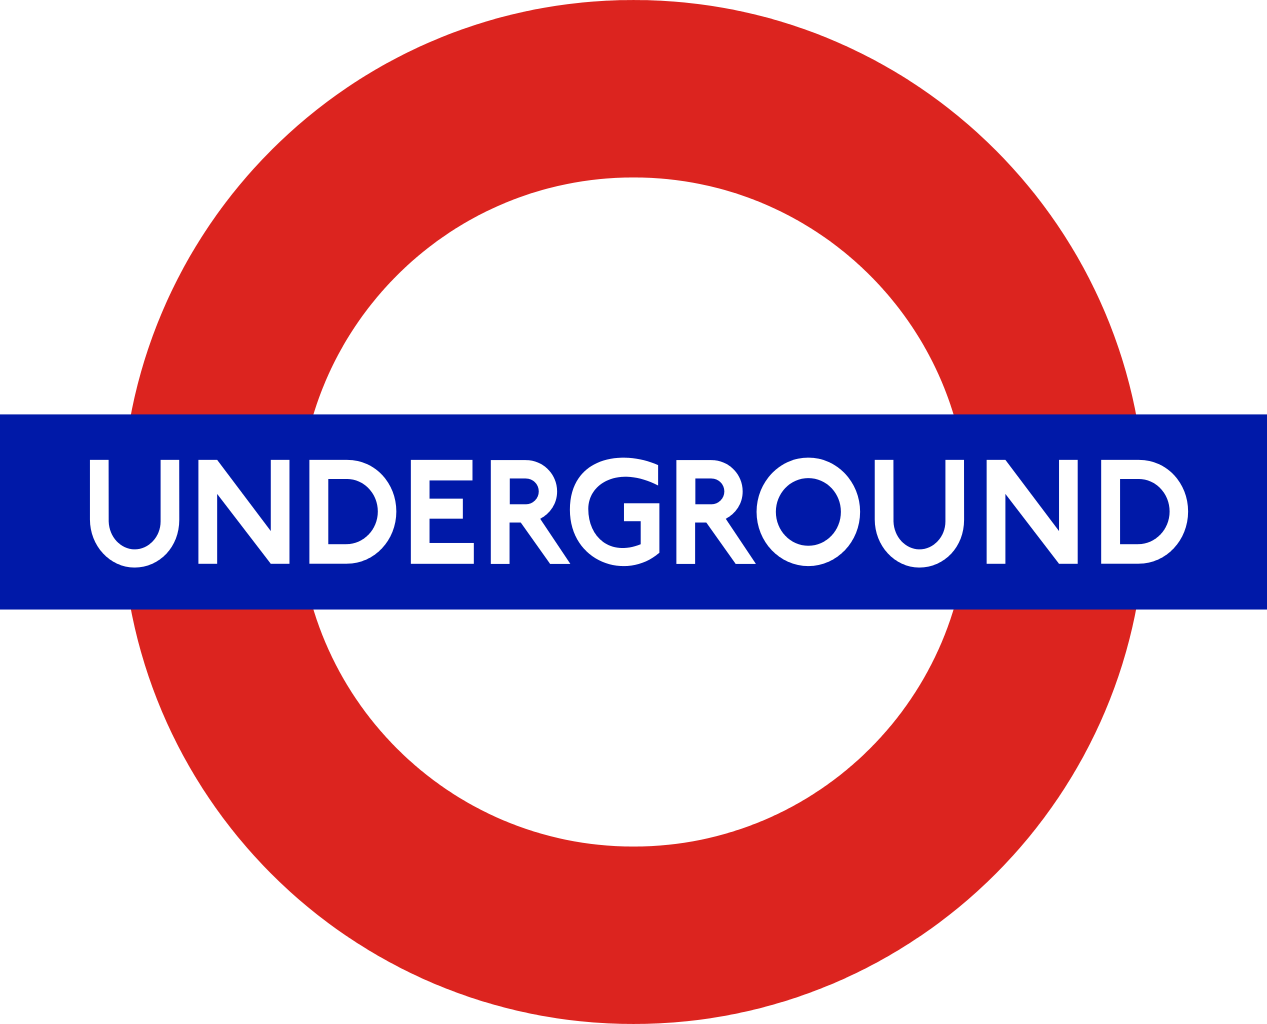 The Tube How the Different Tube Lines Got Their Names Londontopia